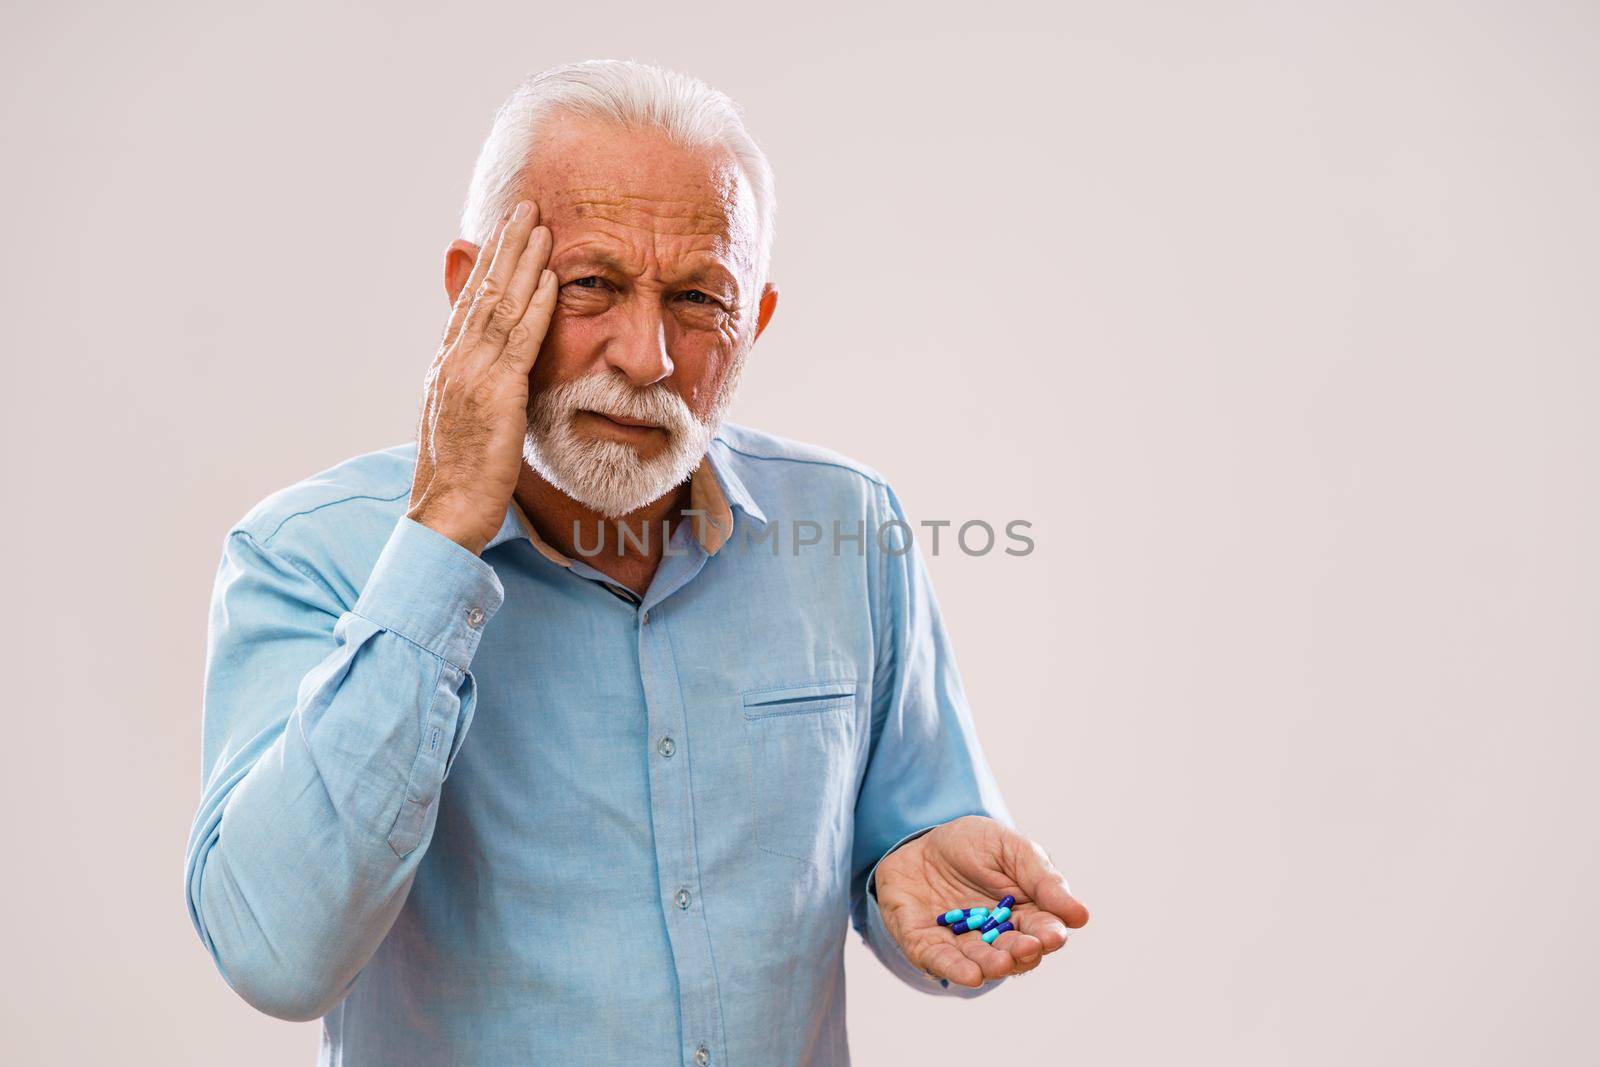 Portrait of serious senior man who is having headache and holding pills.